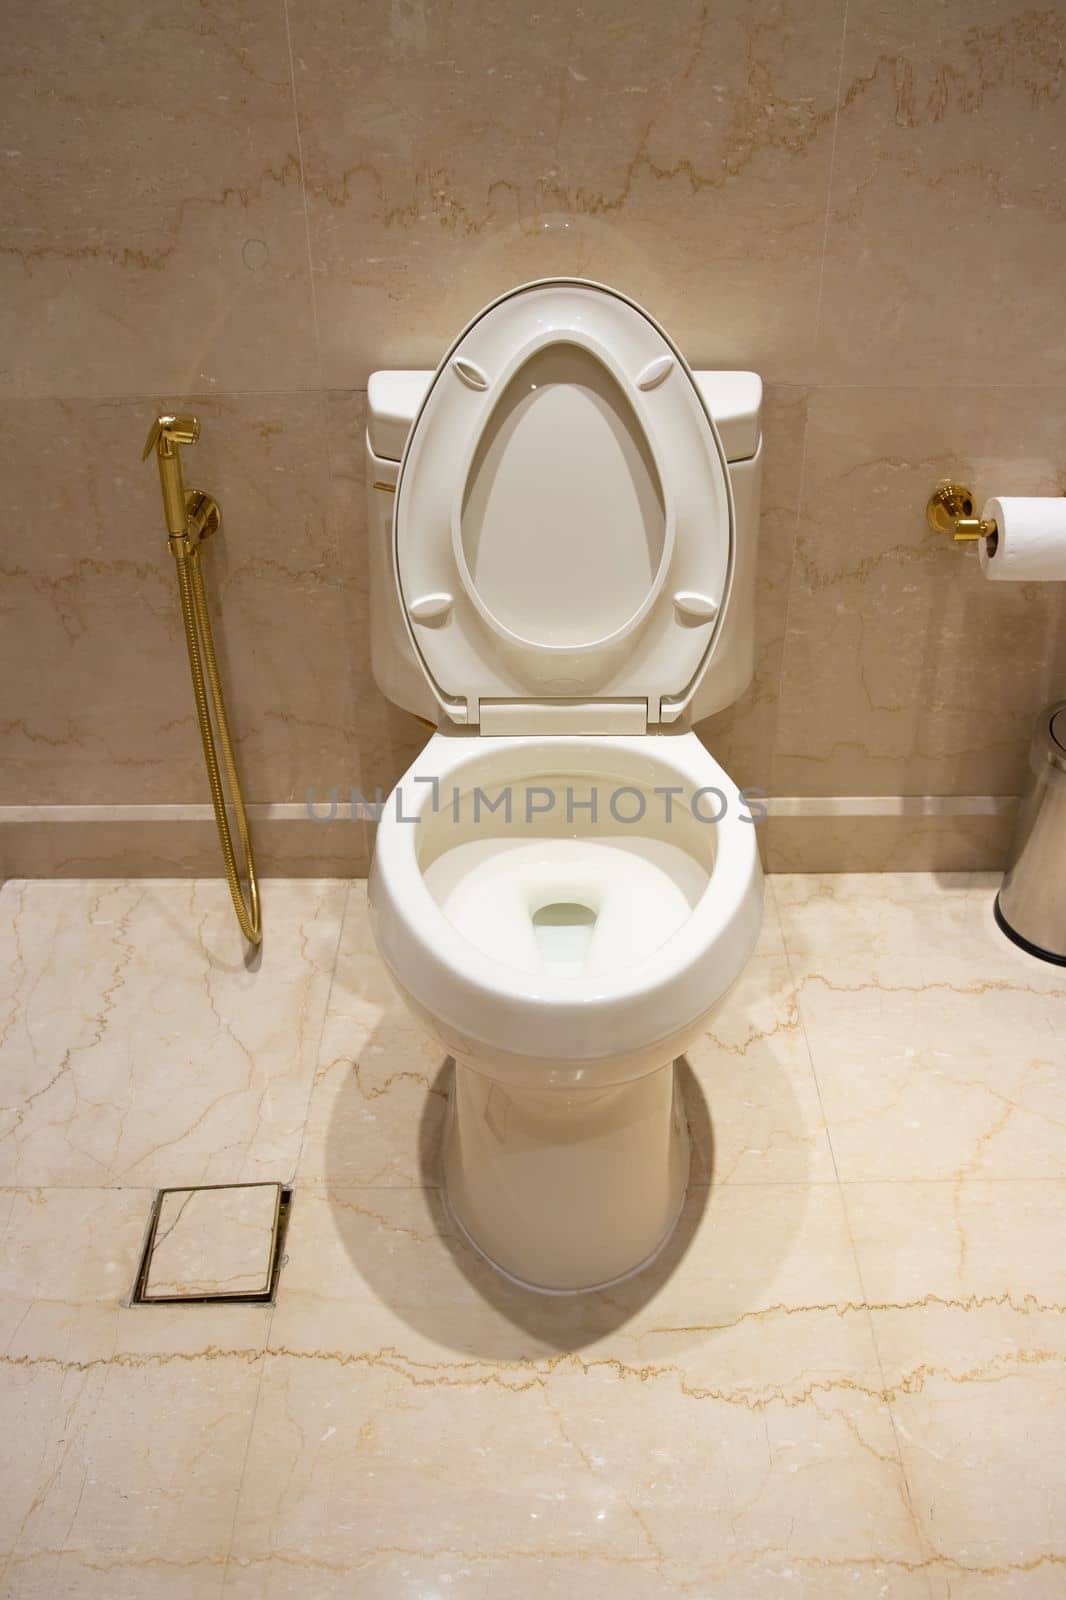 White toilet in the bathroom of an expensive house